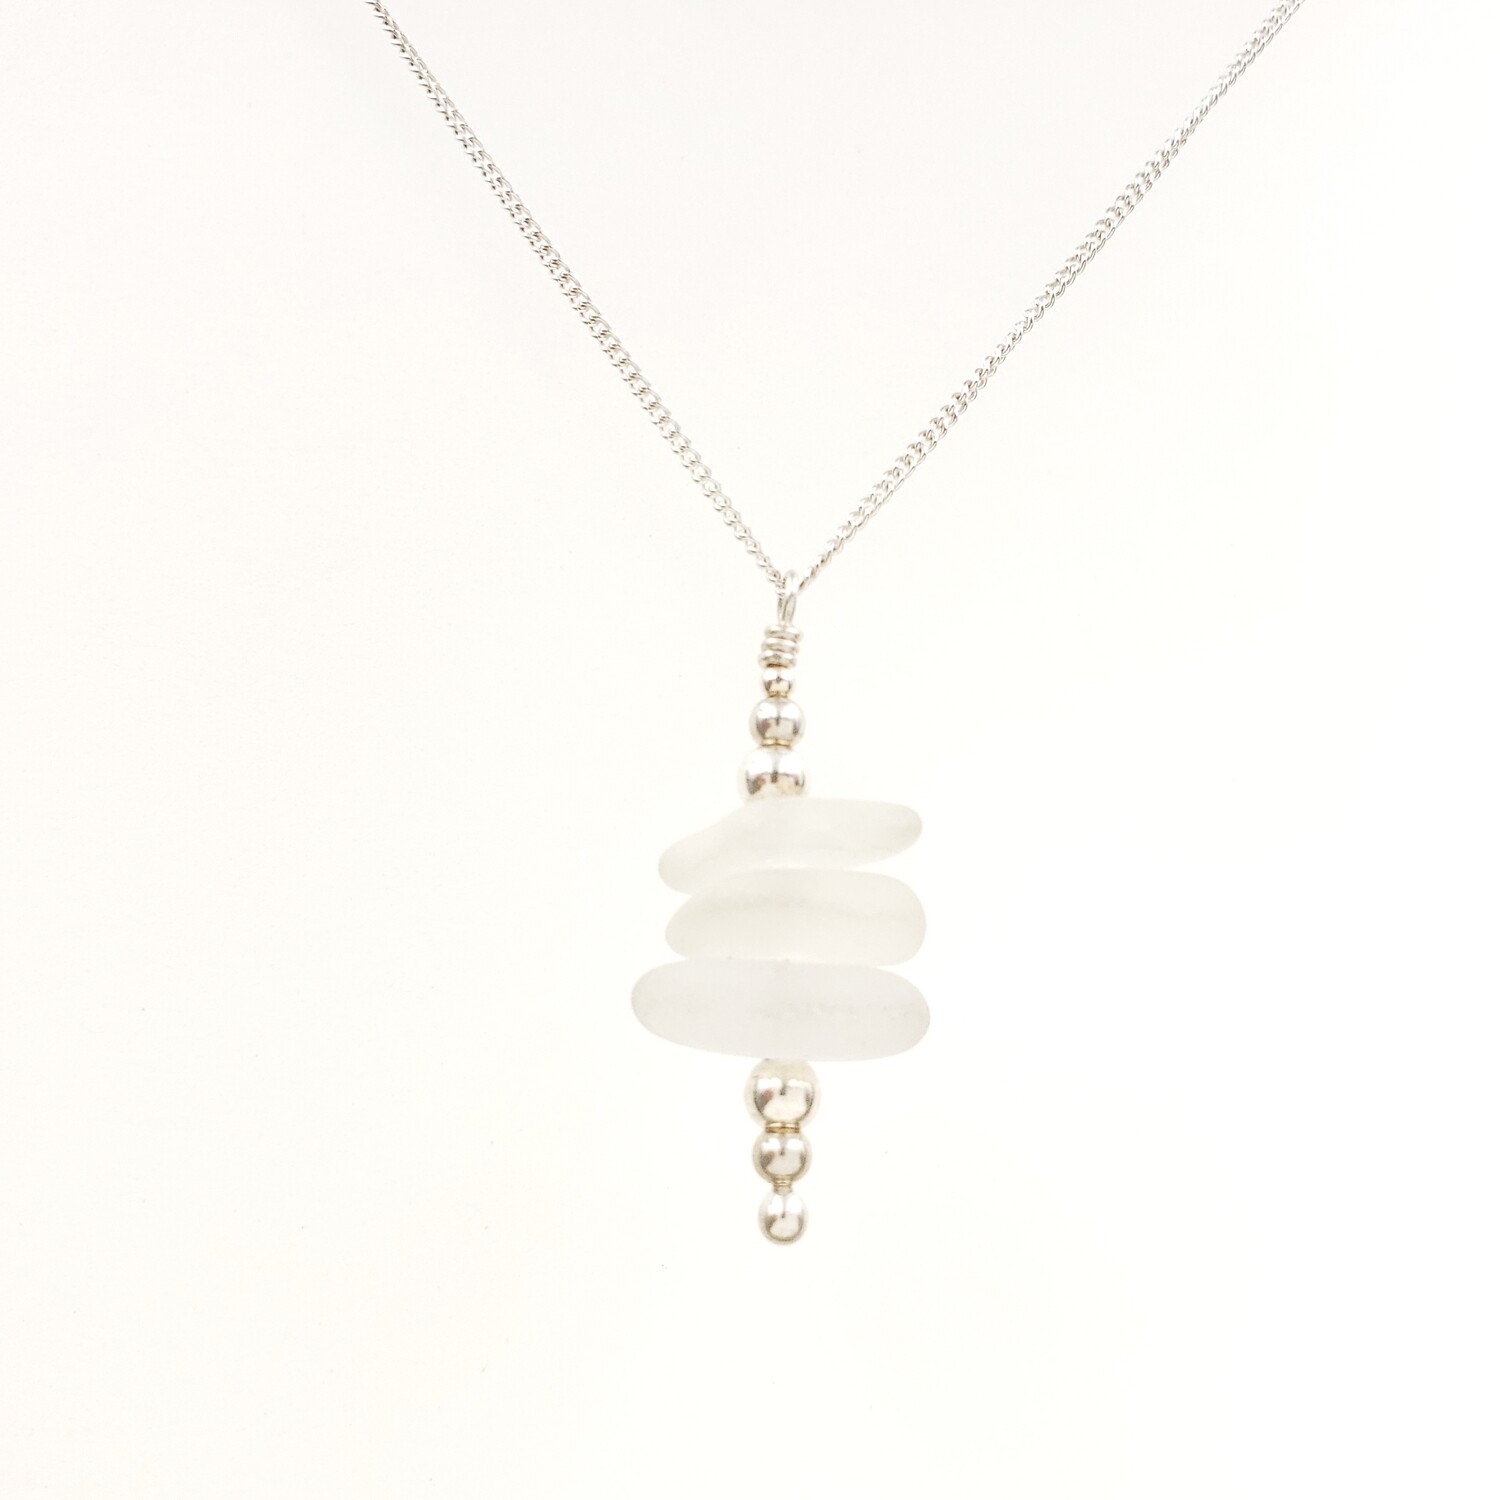 White Lake Erie Beach Glass Stacking Necklace with Silver Beads